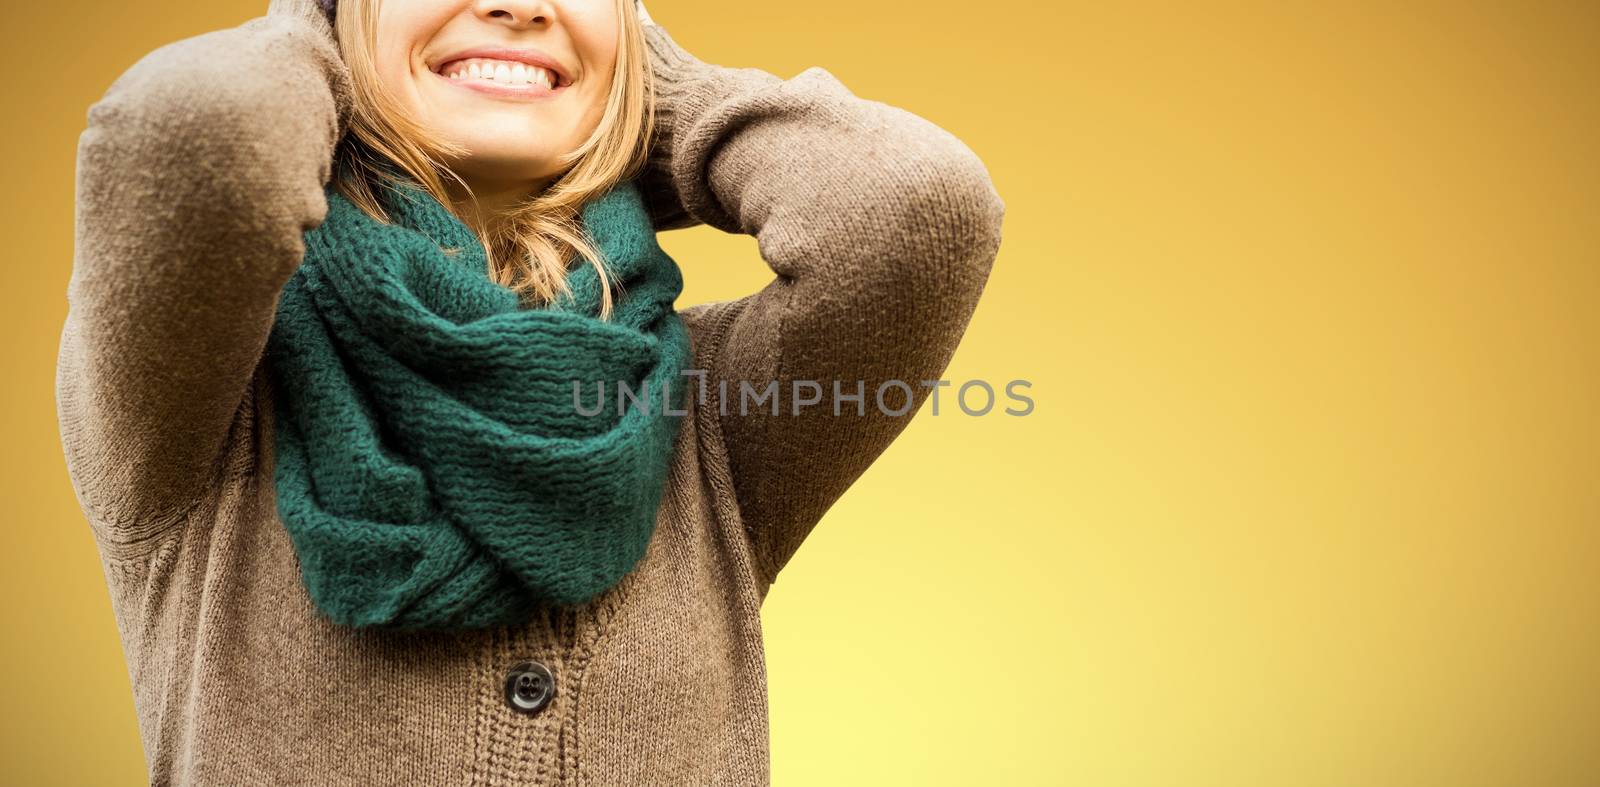 Composite image of  beautiful blond woman with cap and scarf smiling by Wavebreakmedia